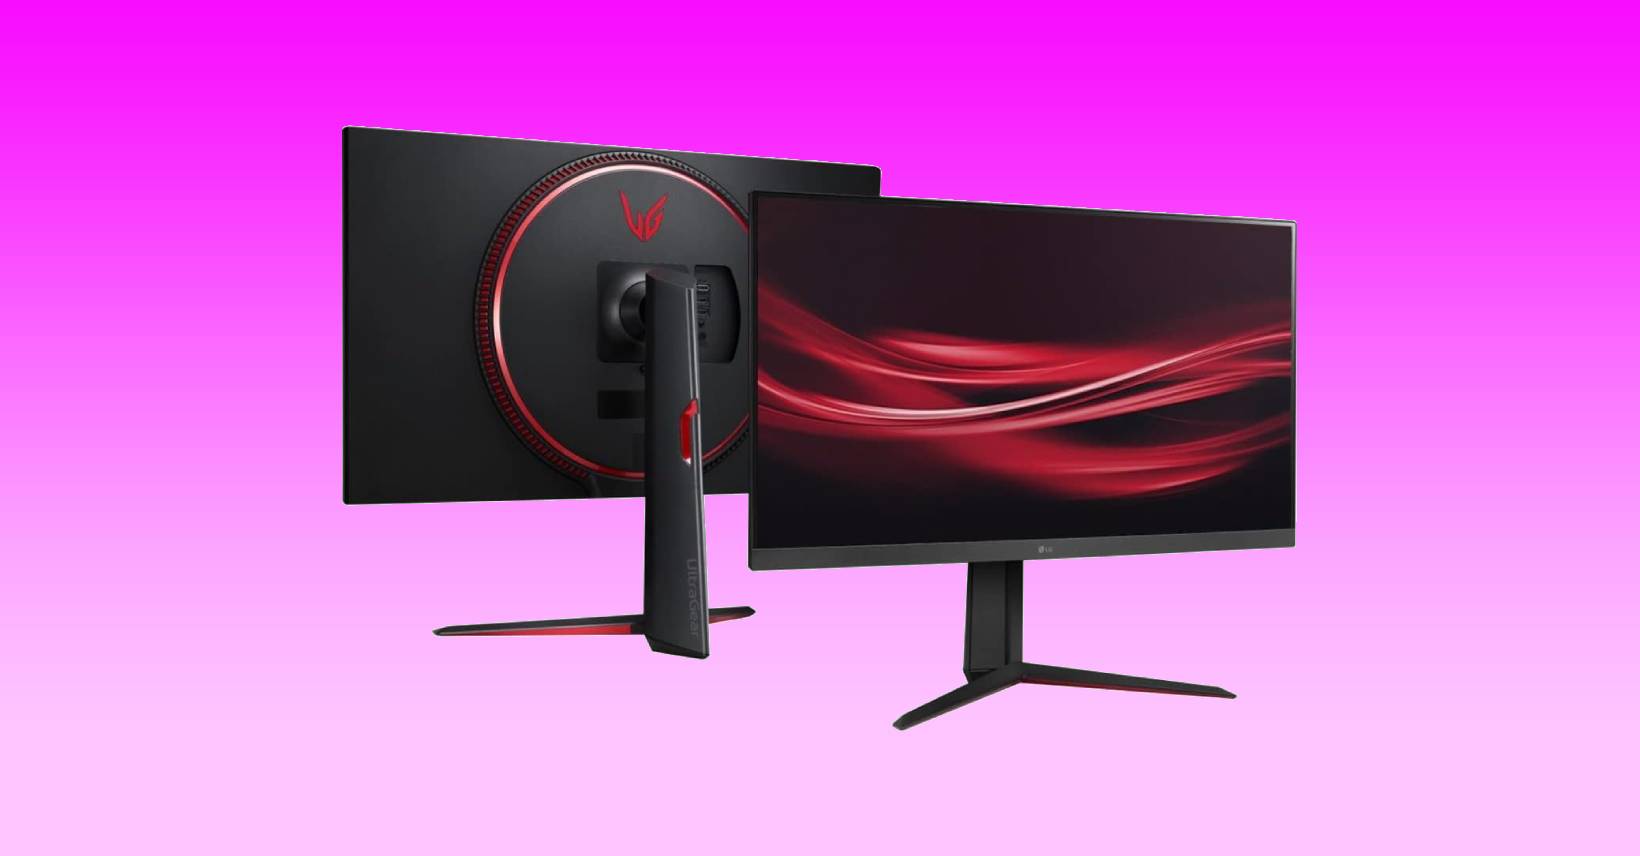 Save $100 on the LG 32GN650-B Ultragear Gaming Monitor – Prime Day deal